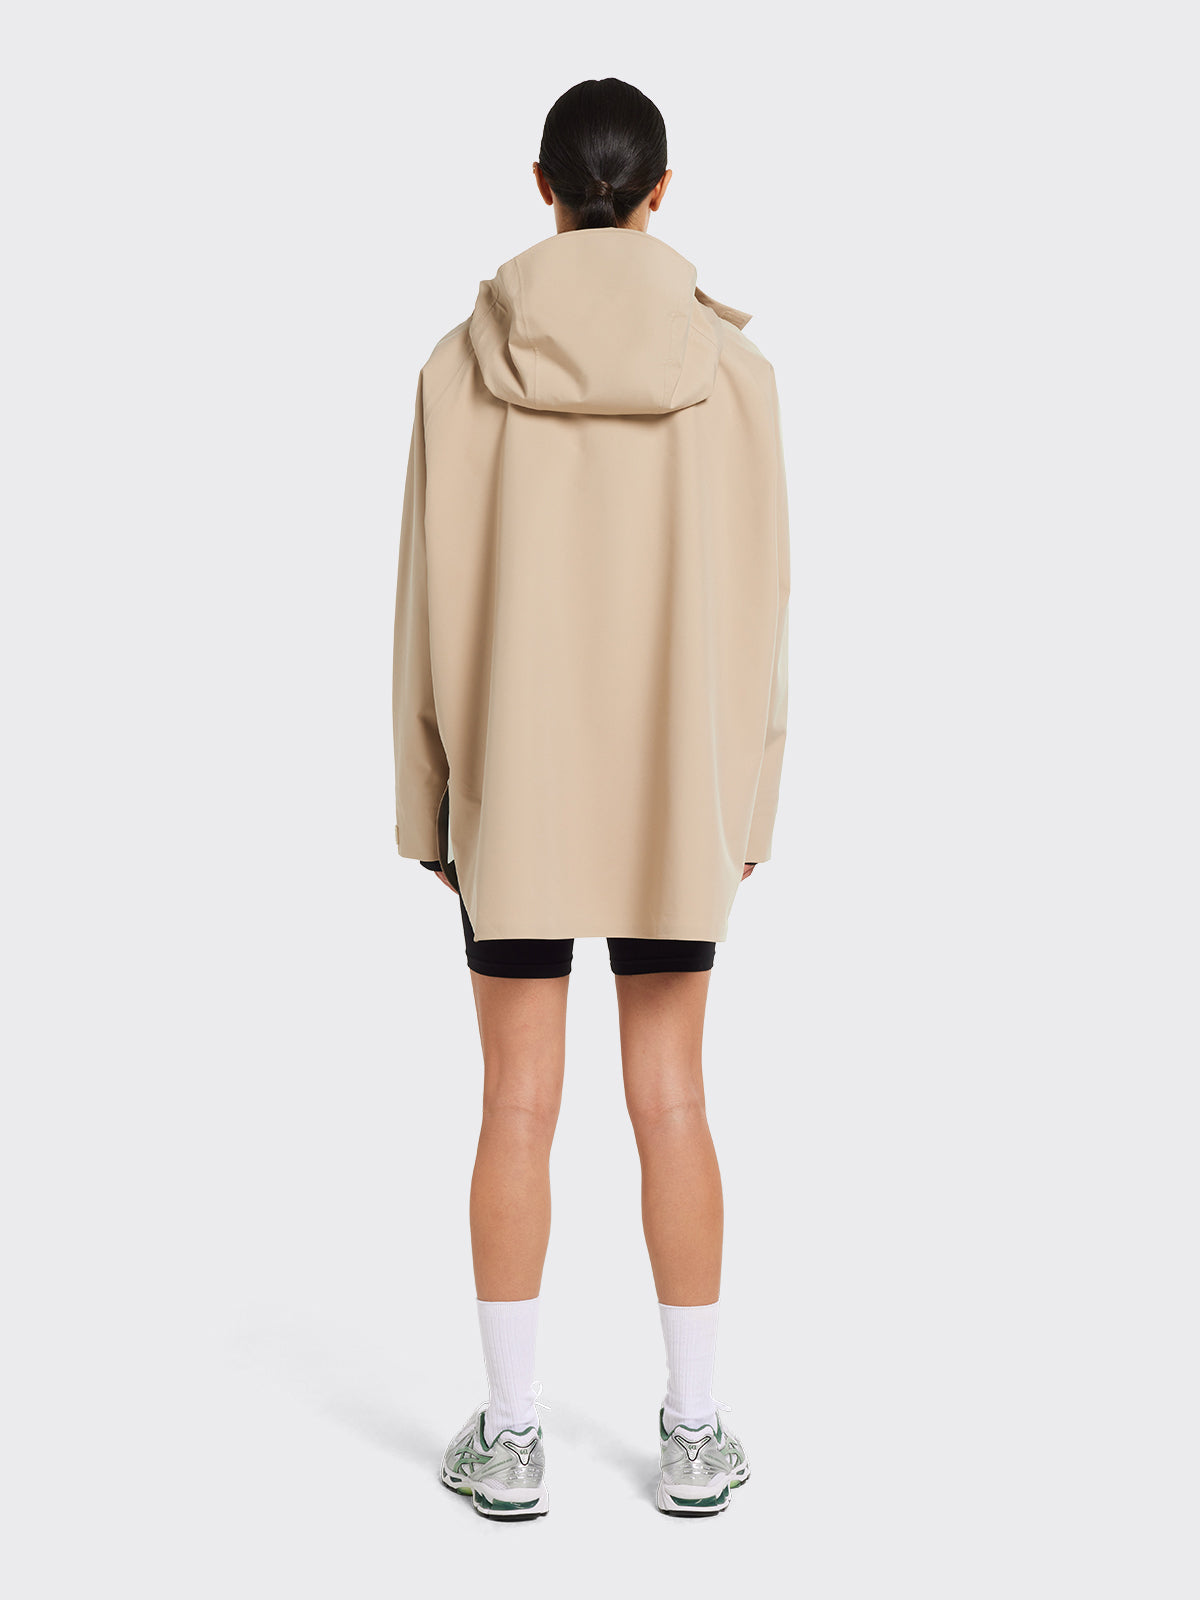 Woman dressed in Voss poncho from Blæst in Beige